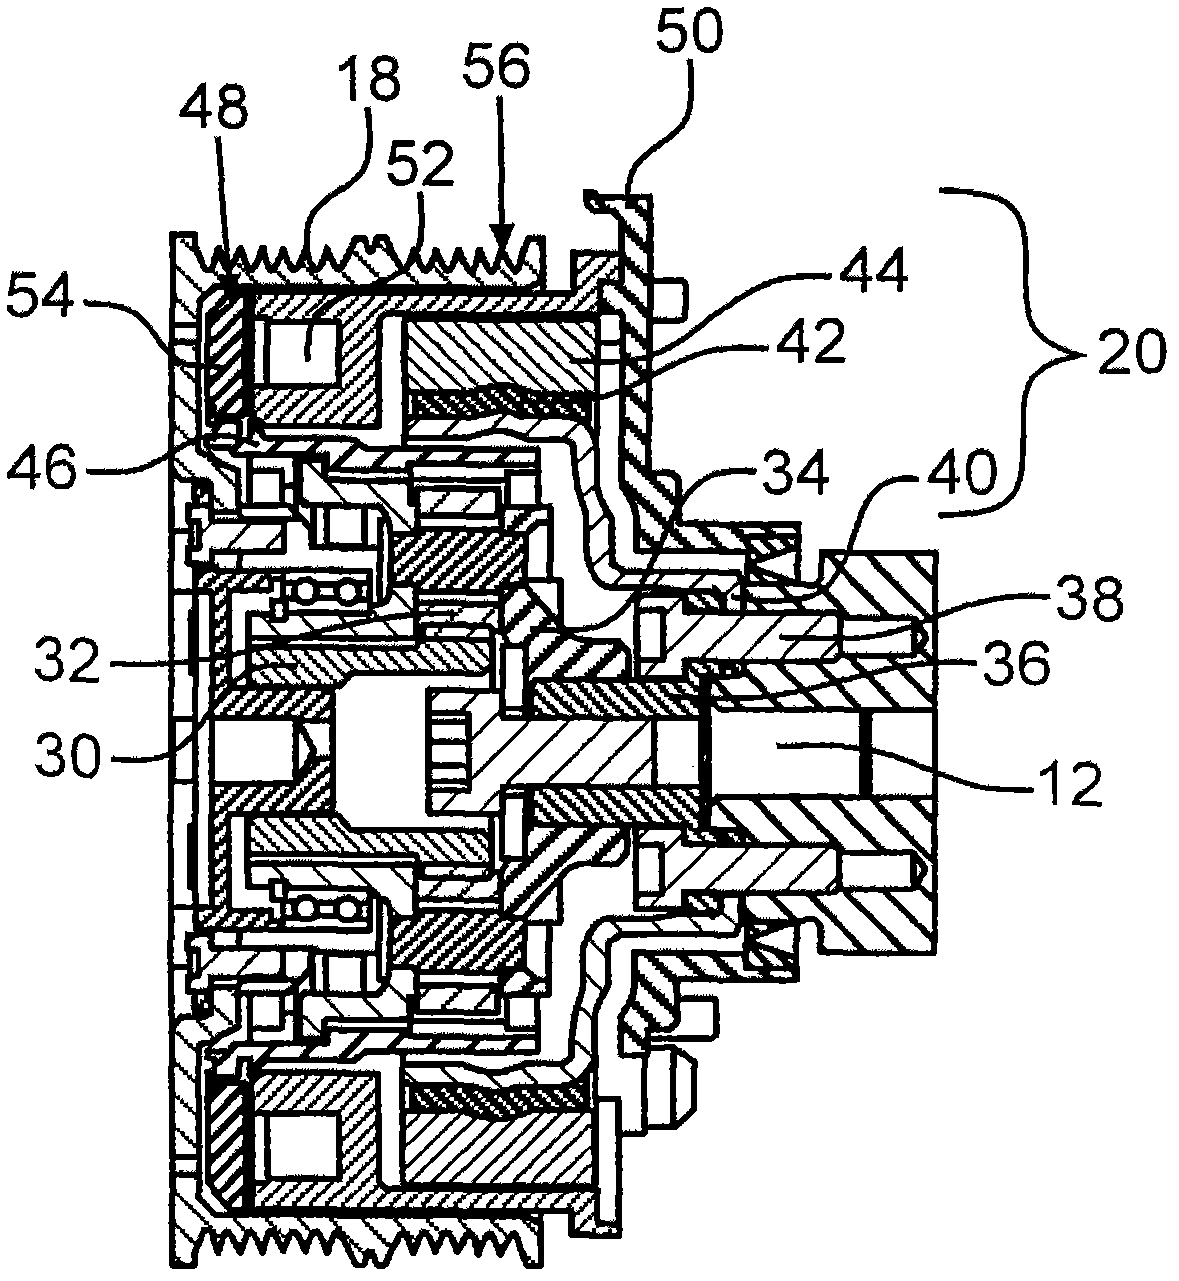 Arrangement with combustion engine and planetary gear attached to same